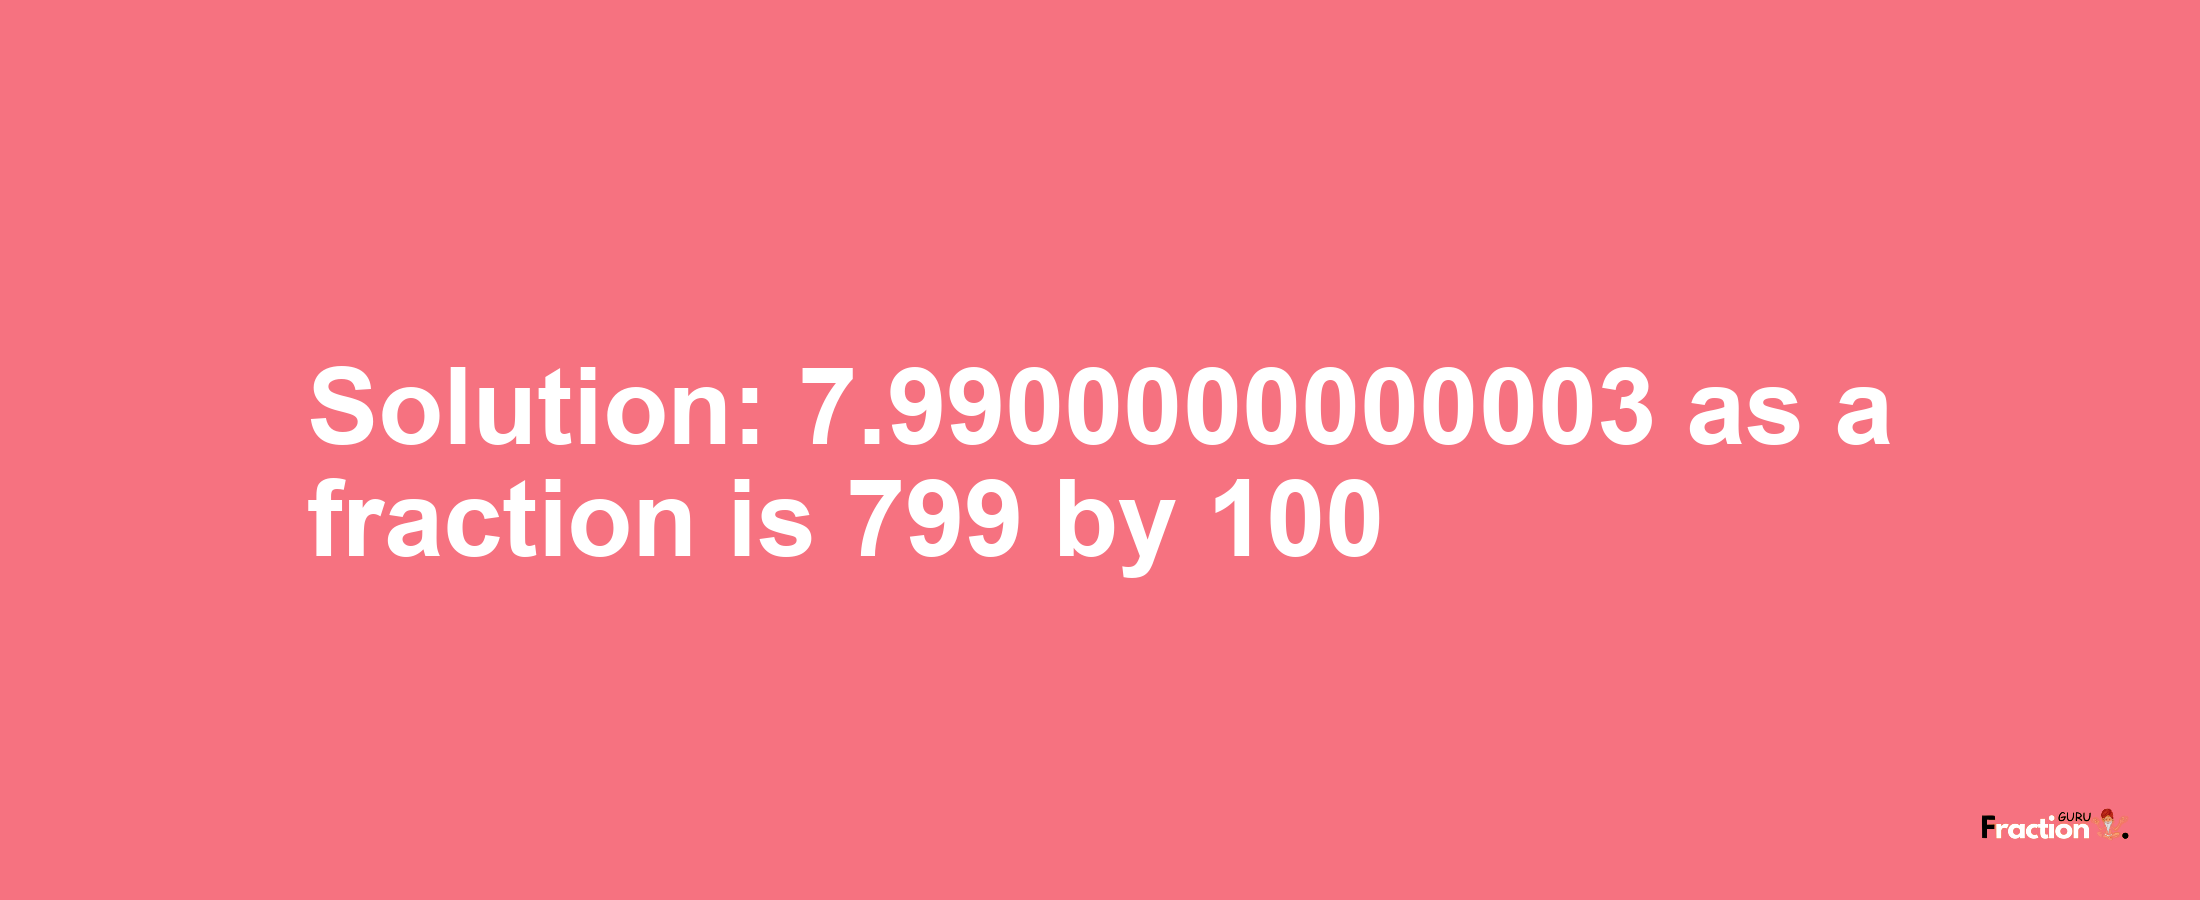 Solution:7.9900000000003 as a fraction is 799/100